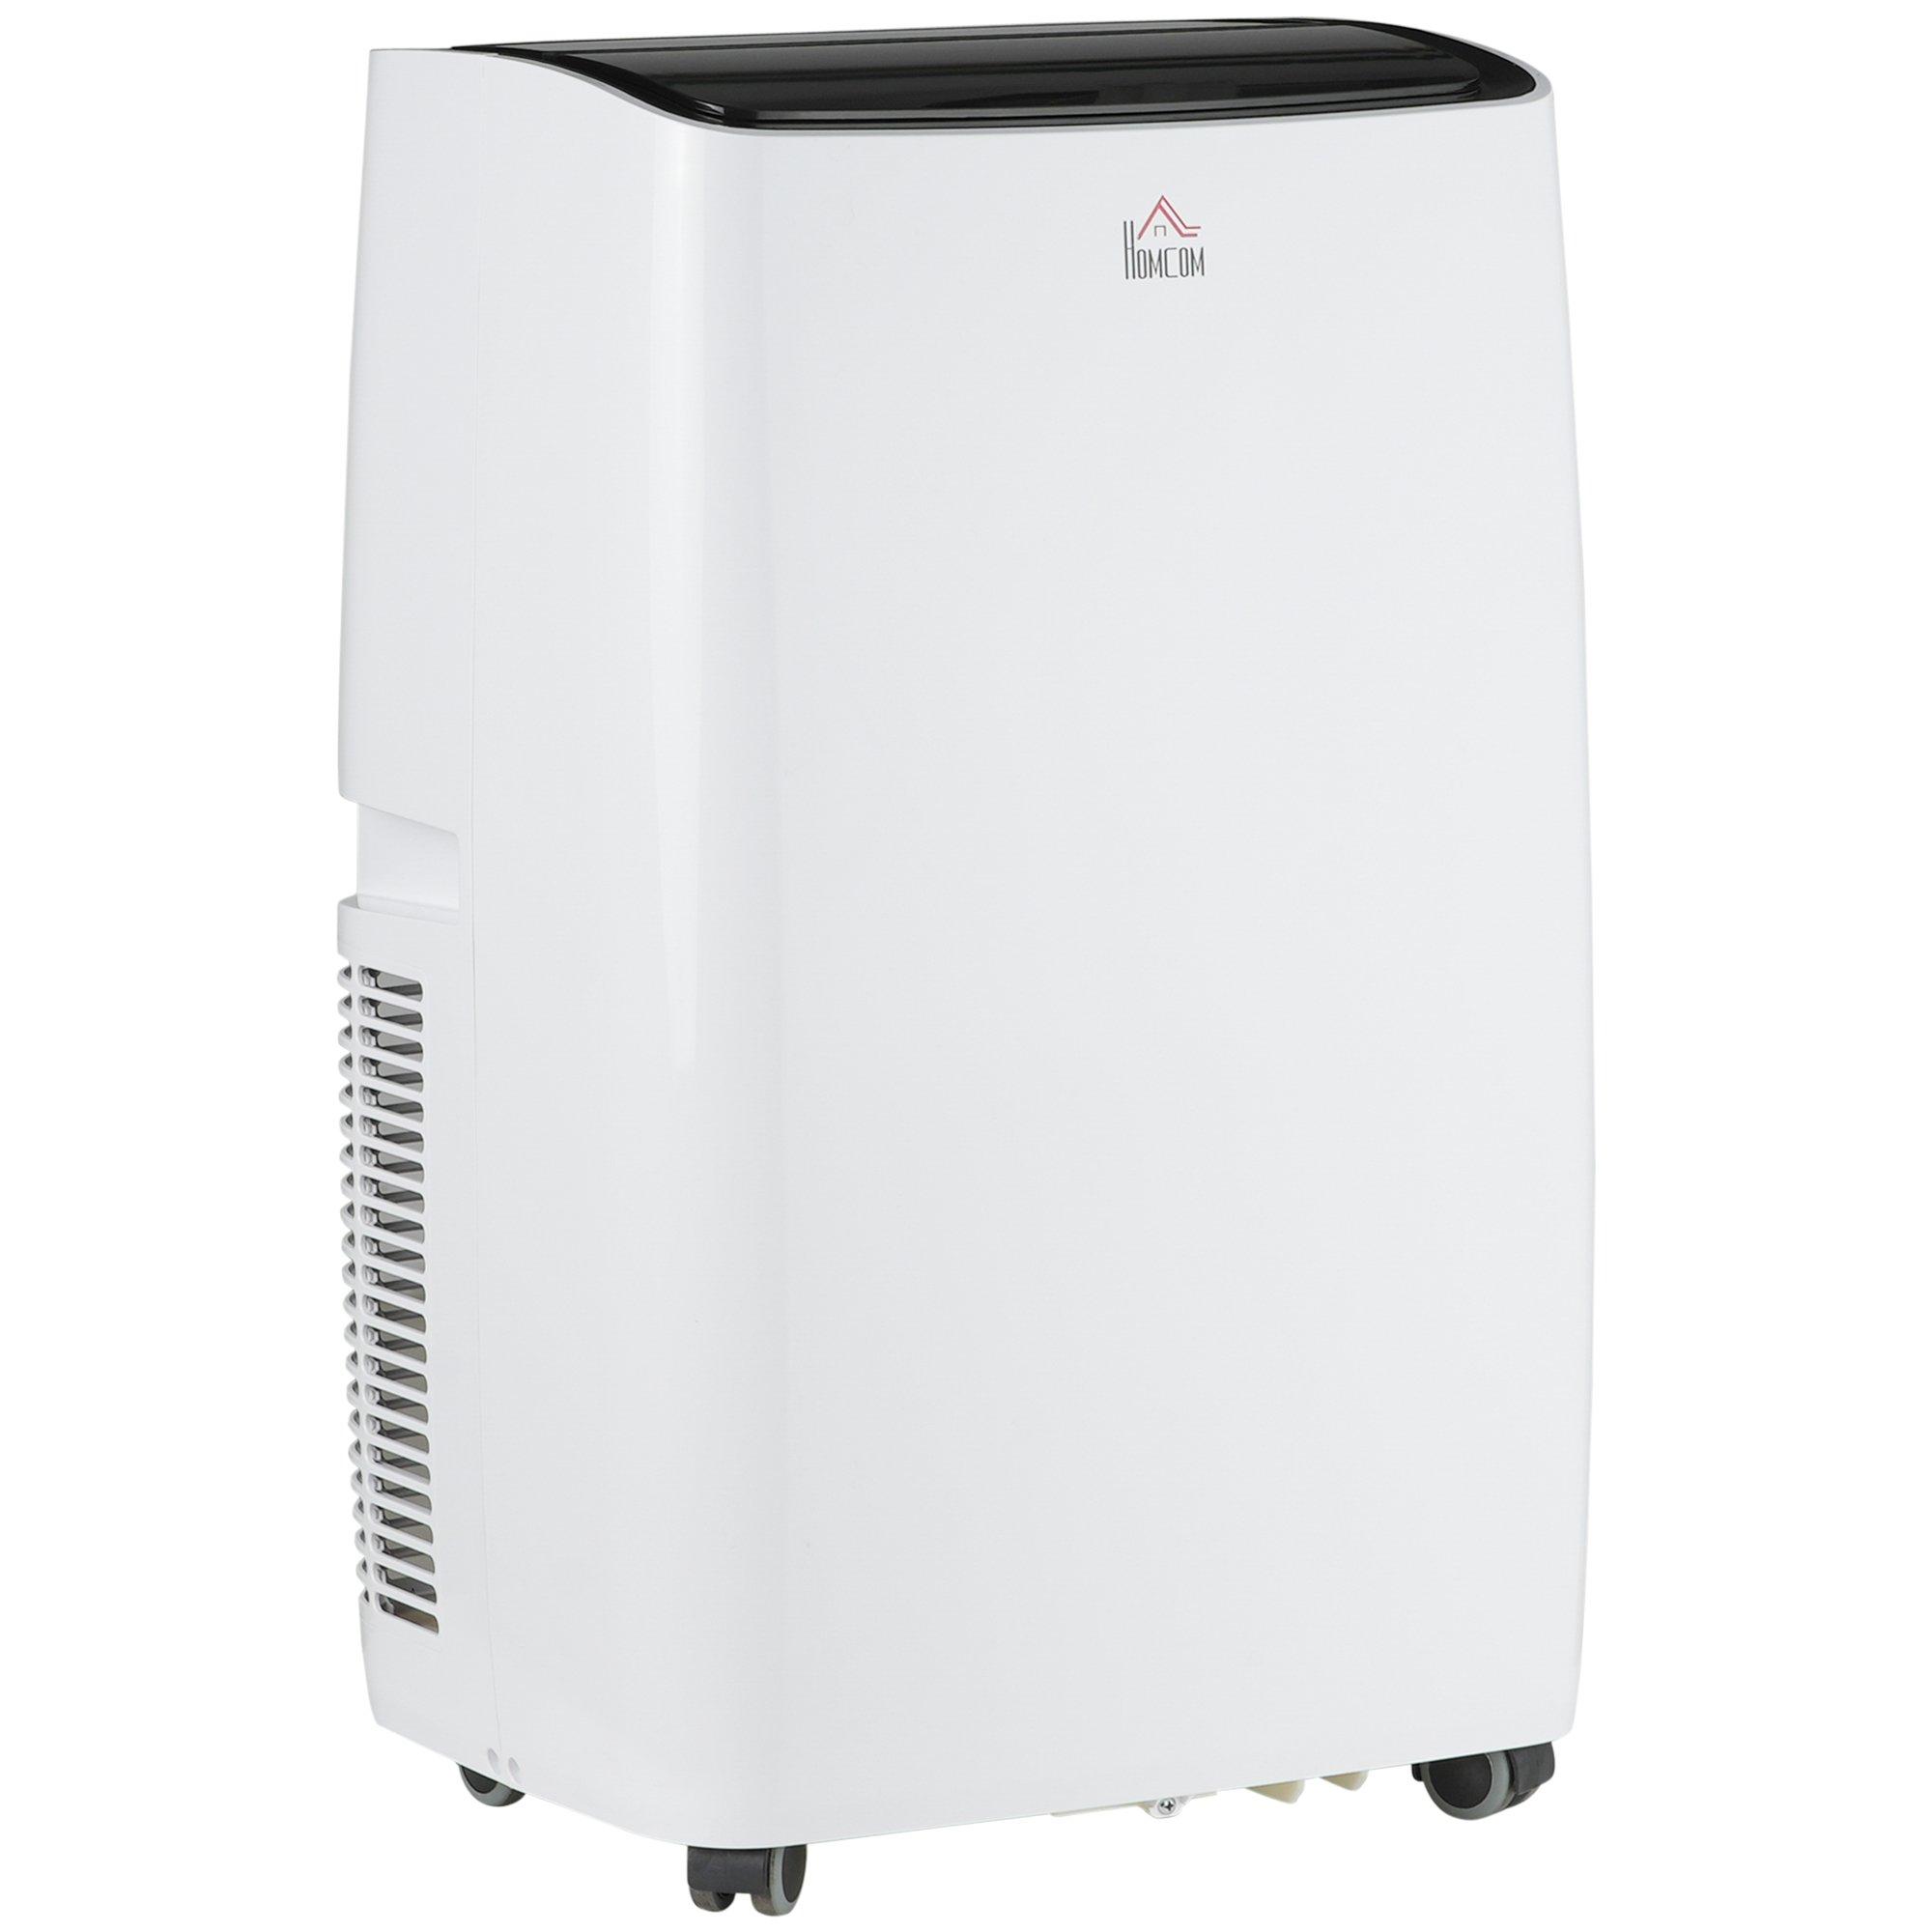 14000 BTU Moible Air Conditioner for Room up to 40 square meters